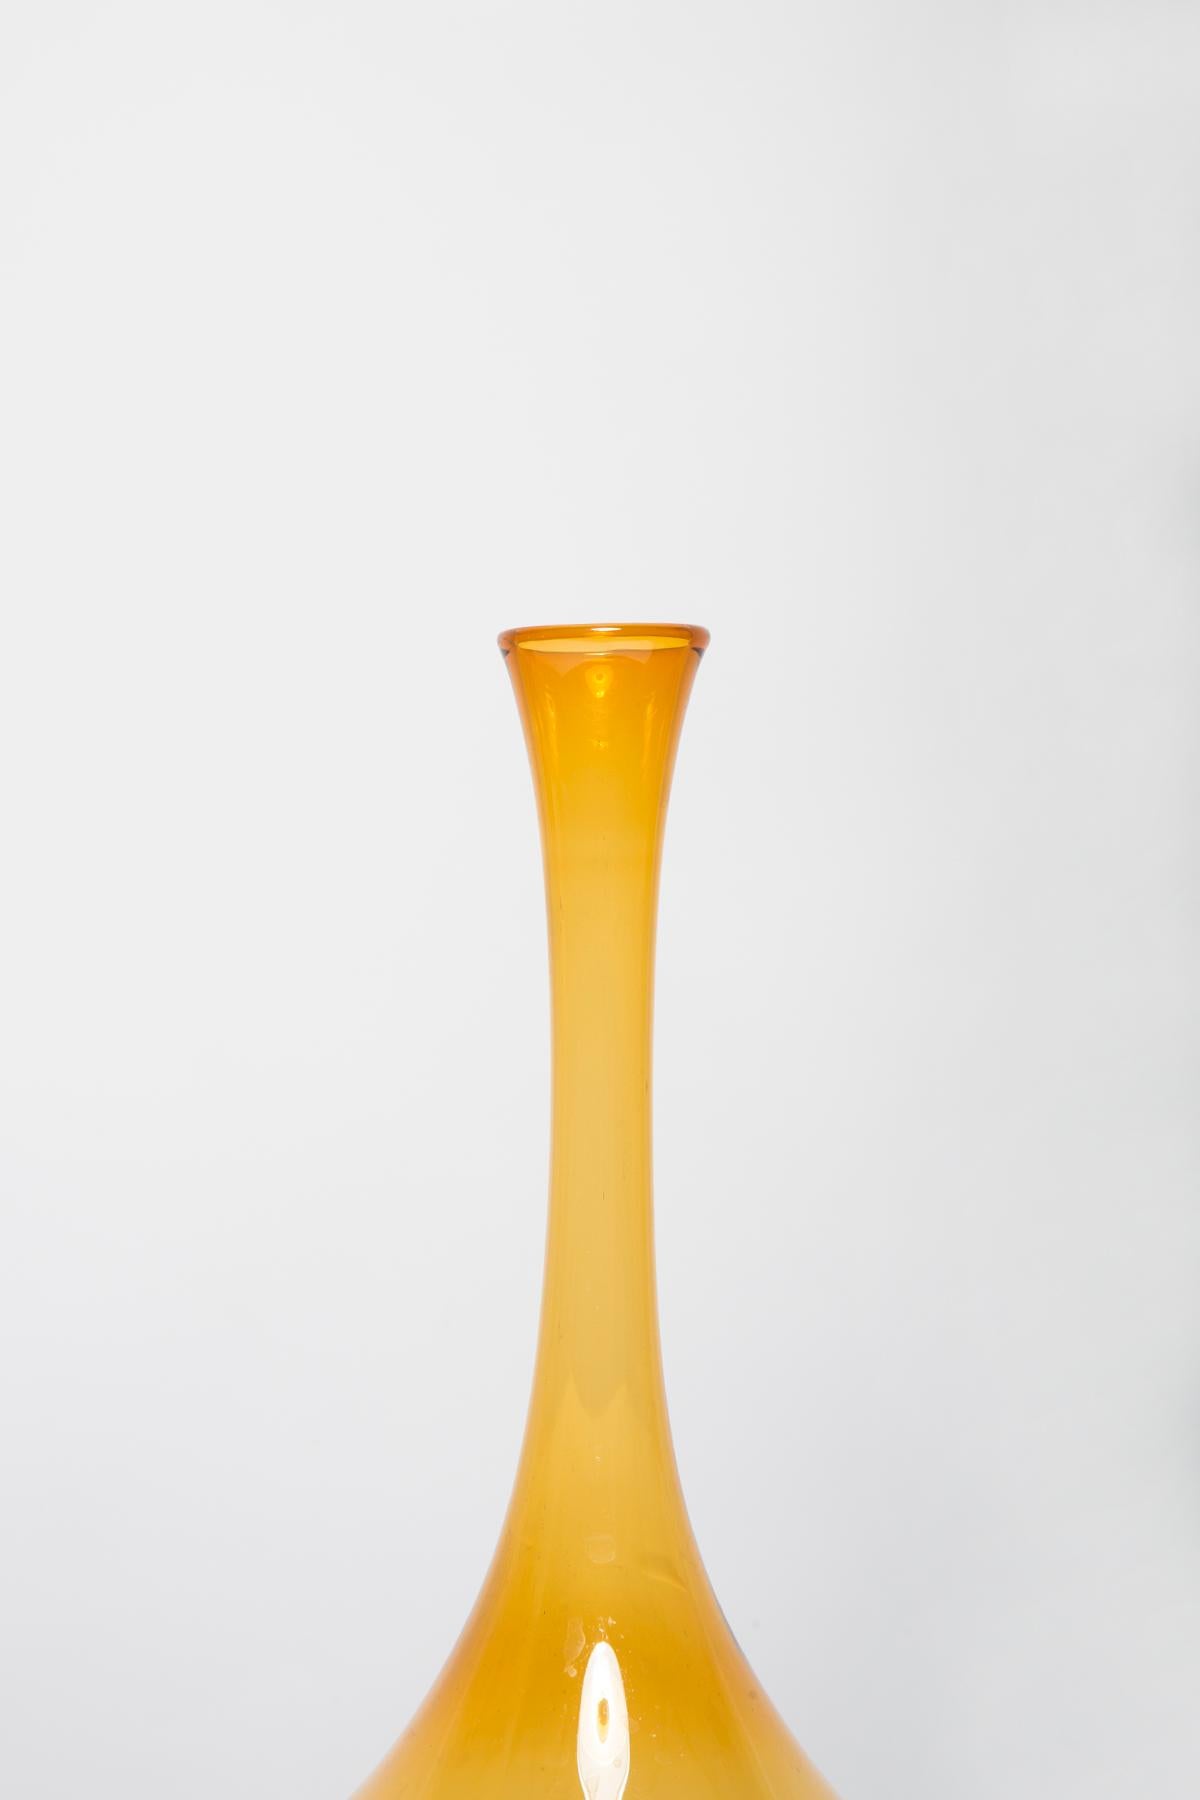 Mid Century Vintage Artistic Glass Yellow Vase, Europe, 1970s For Sale 1